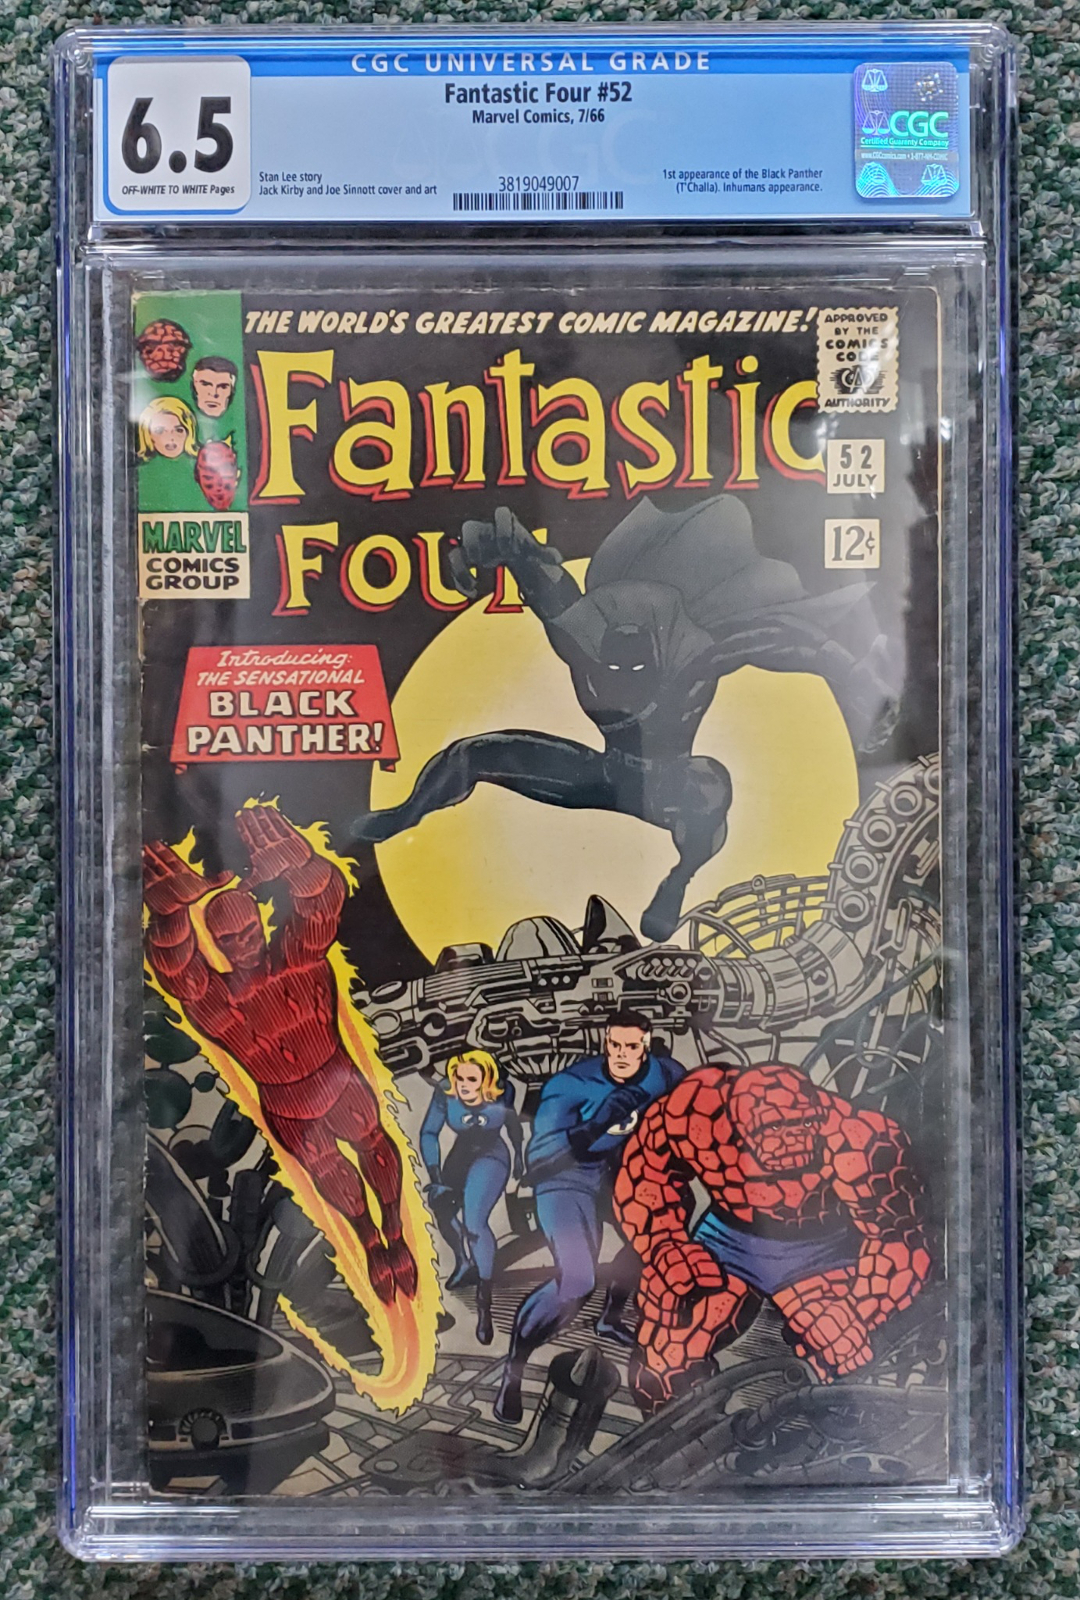 Fantastic Four #52 CGC-Graded 6.5: 1st Appearance of Black Panther